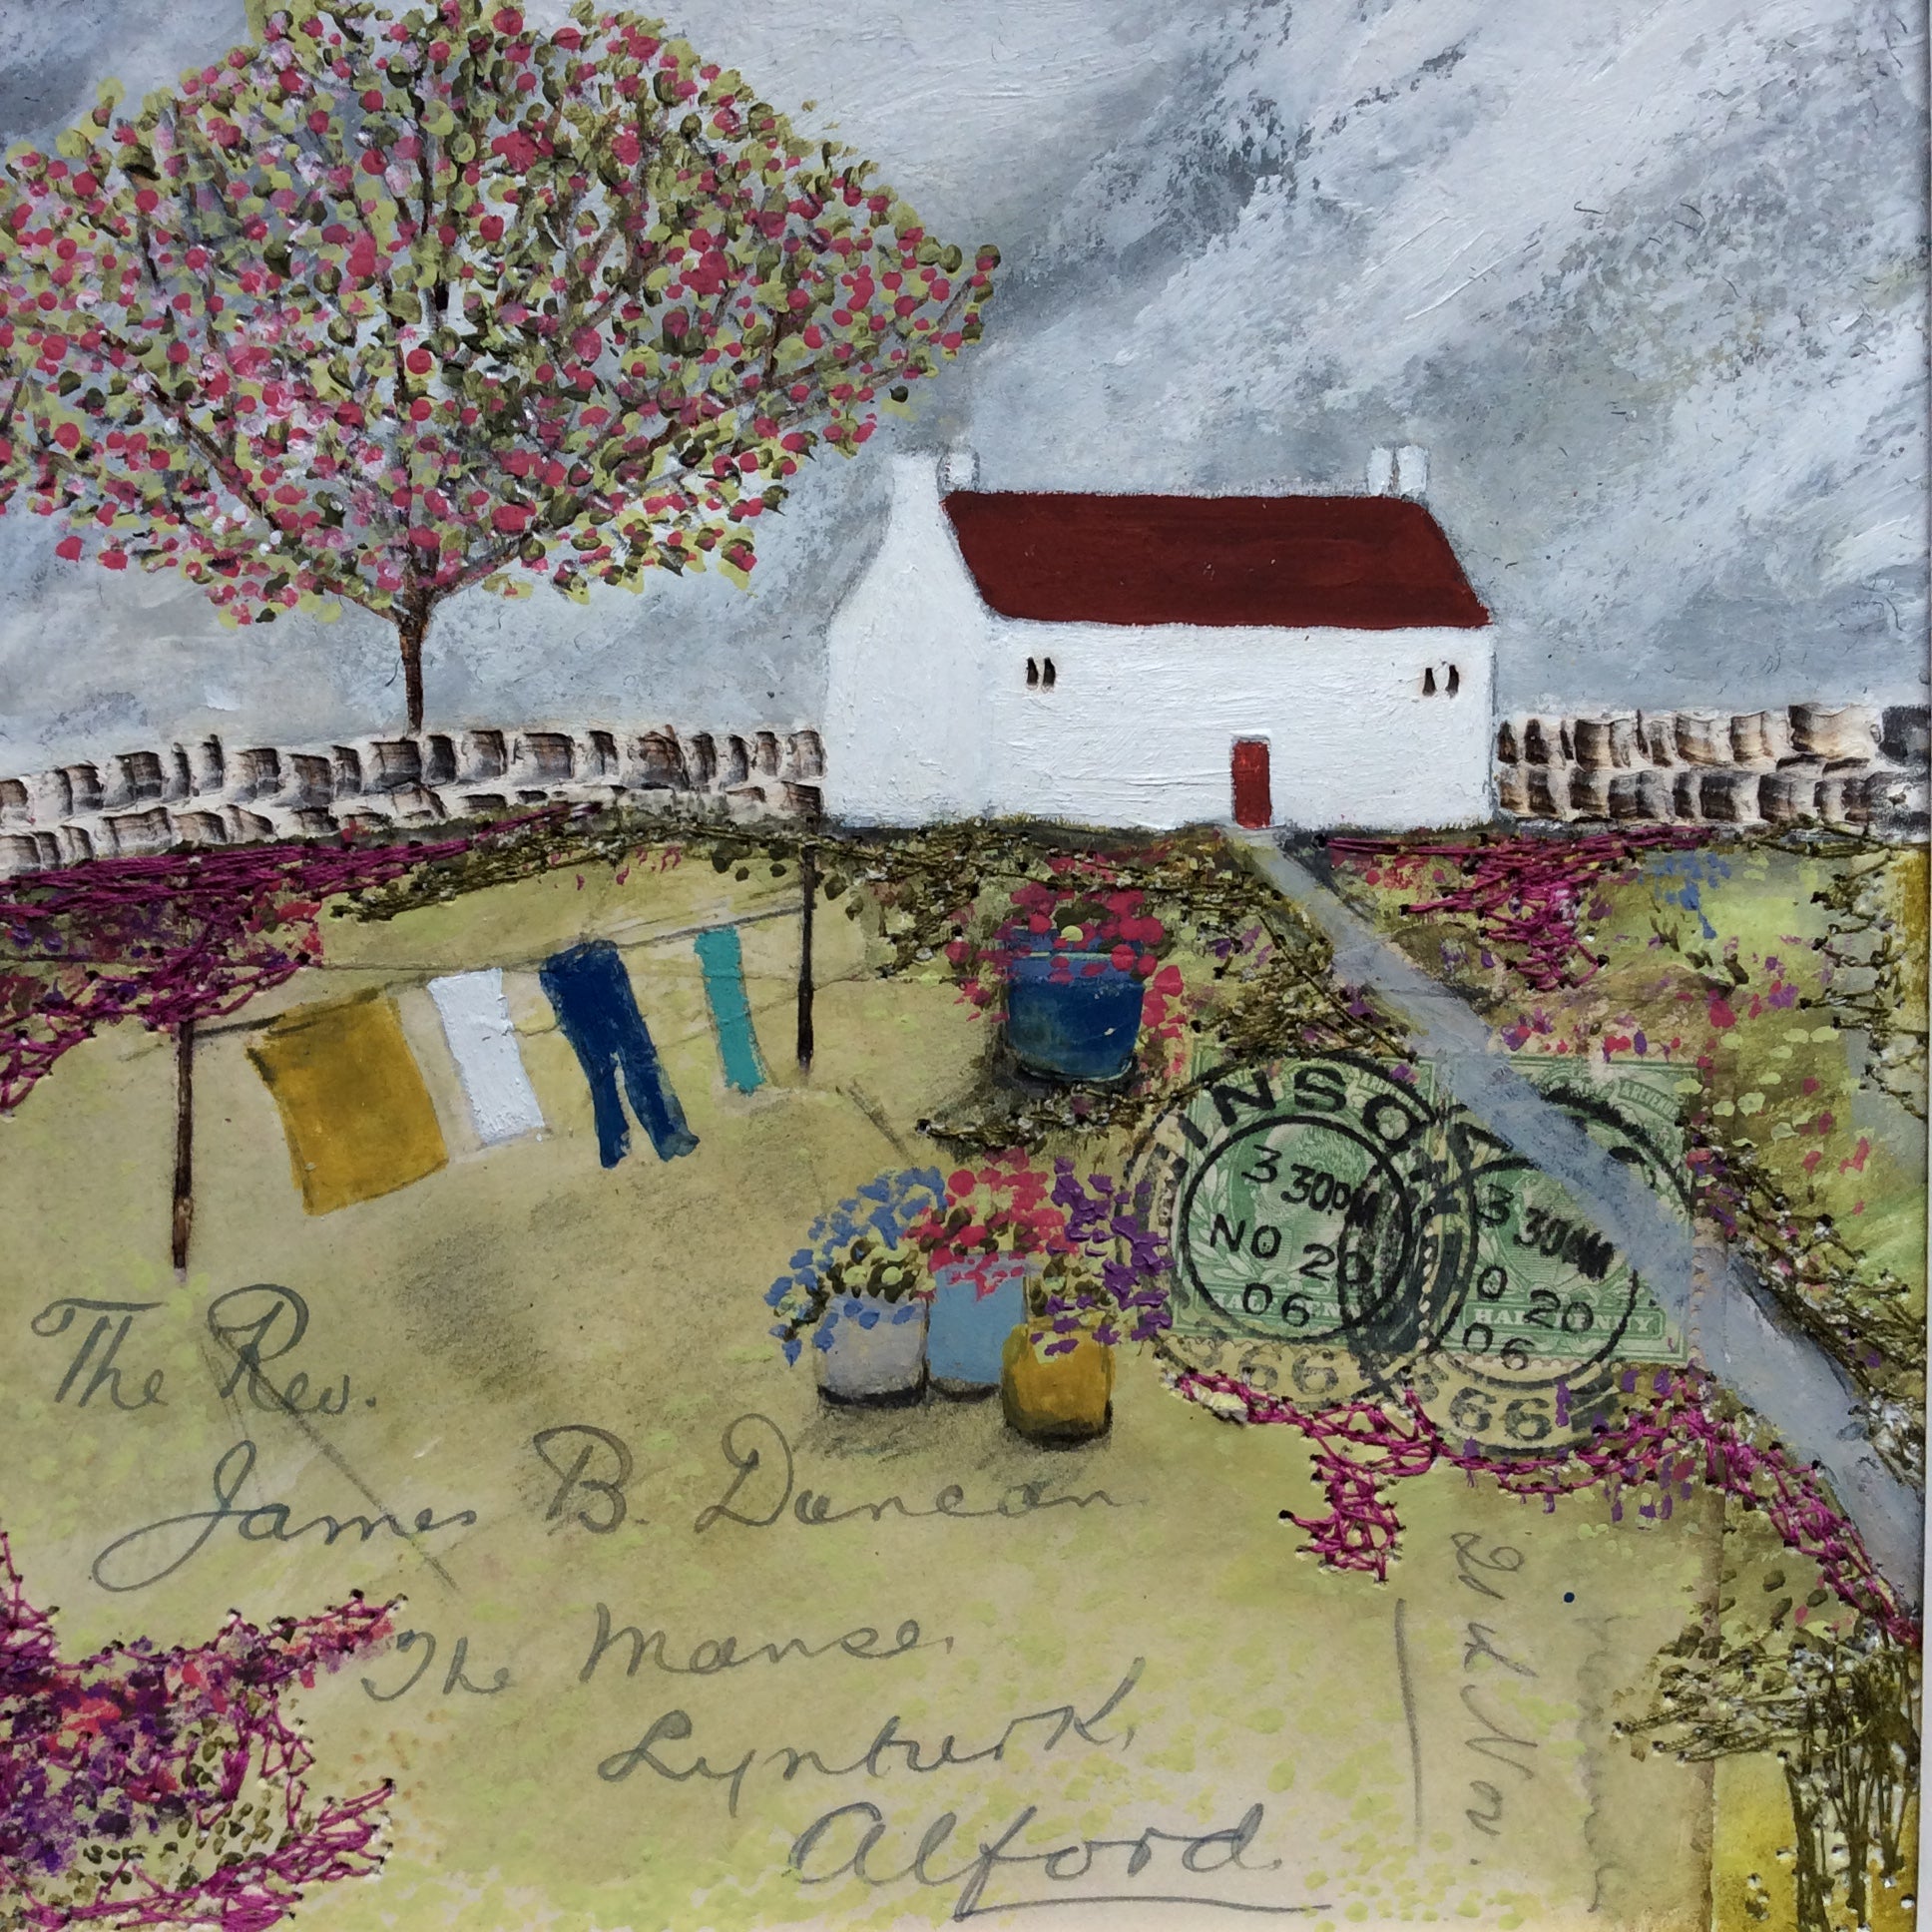 Mixed Media Art By Louise O'Hara “Halfpenny Cottage”